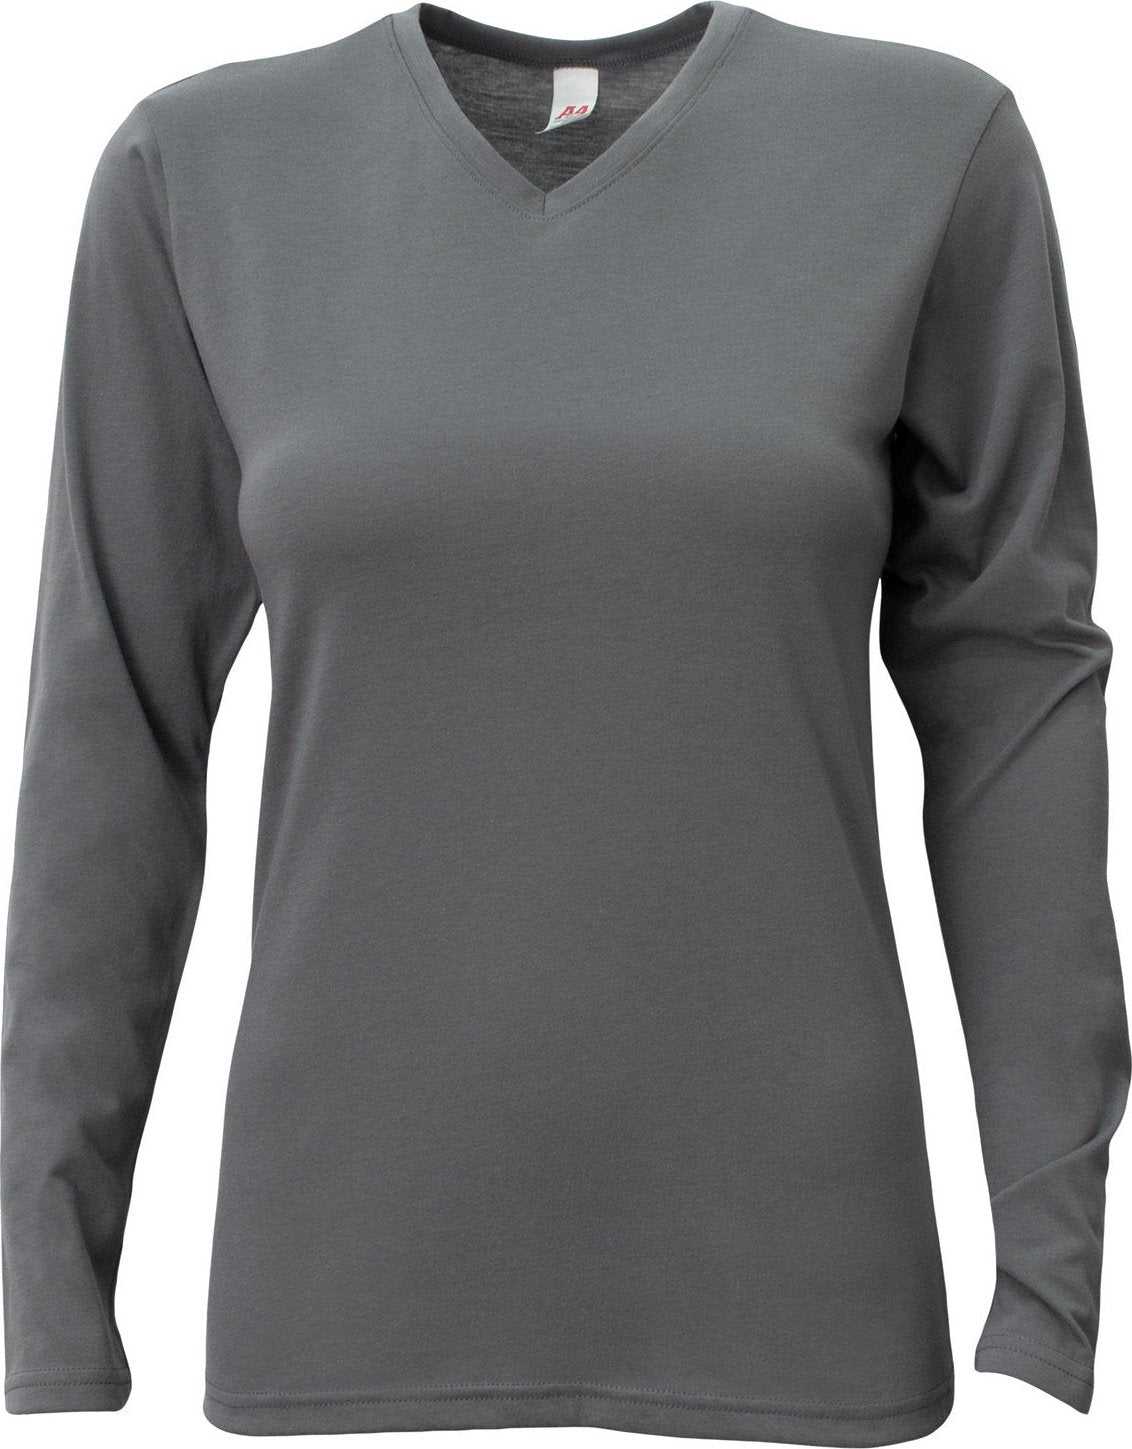 A4 NW3029 Ladies' Long-Sleeve Softek V-Neck T-Shirt - GRAPHITE - HIT a Double - 2